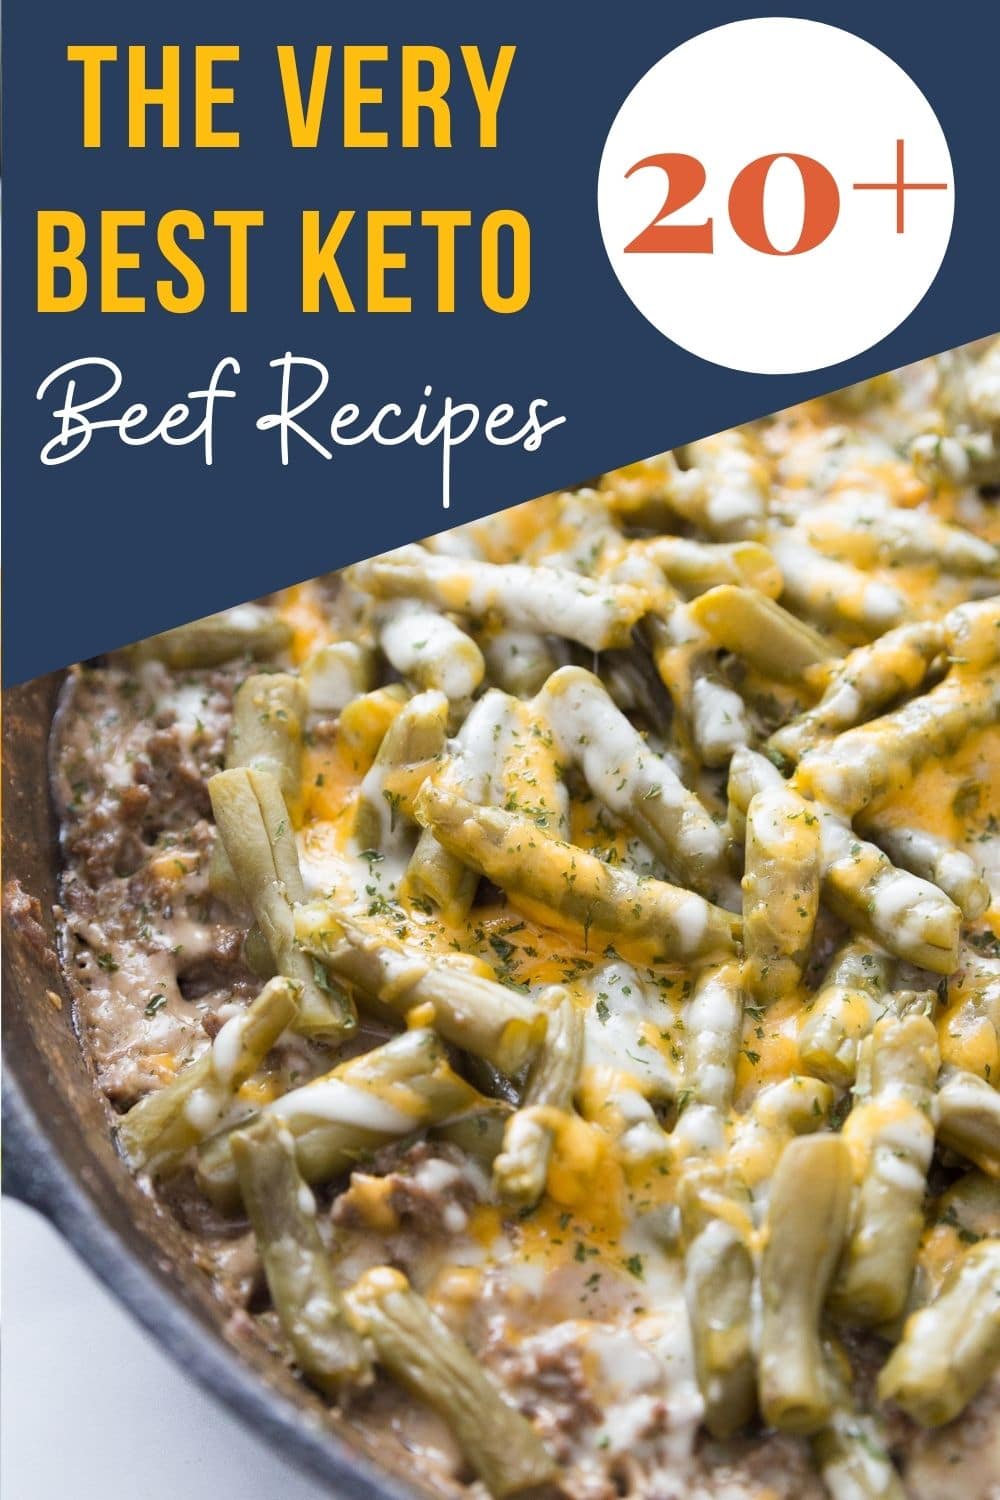 collage for 20+ keto beef recipes 